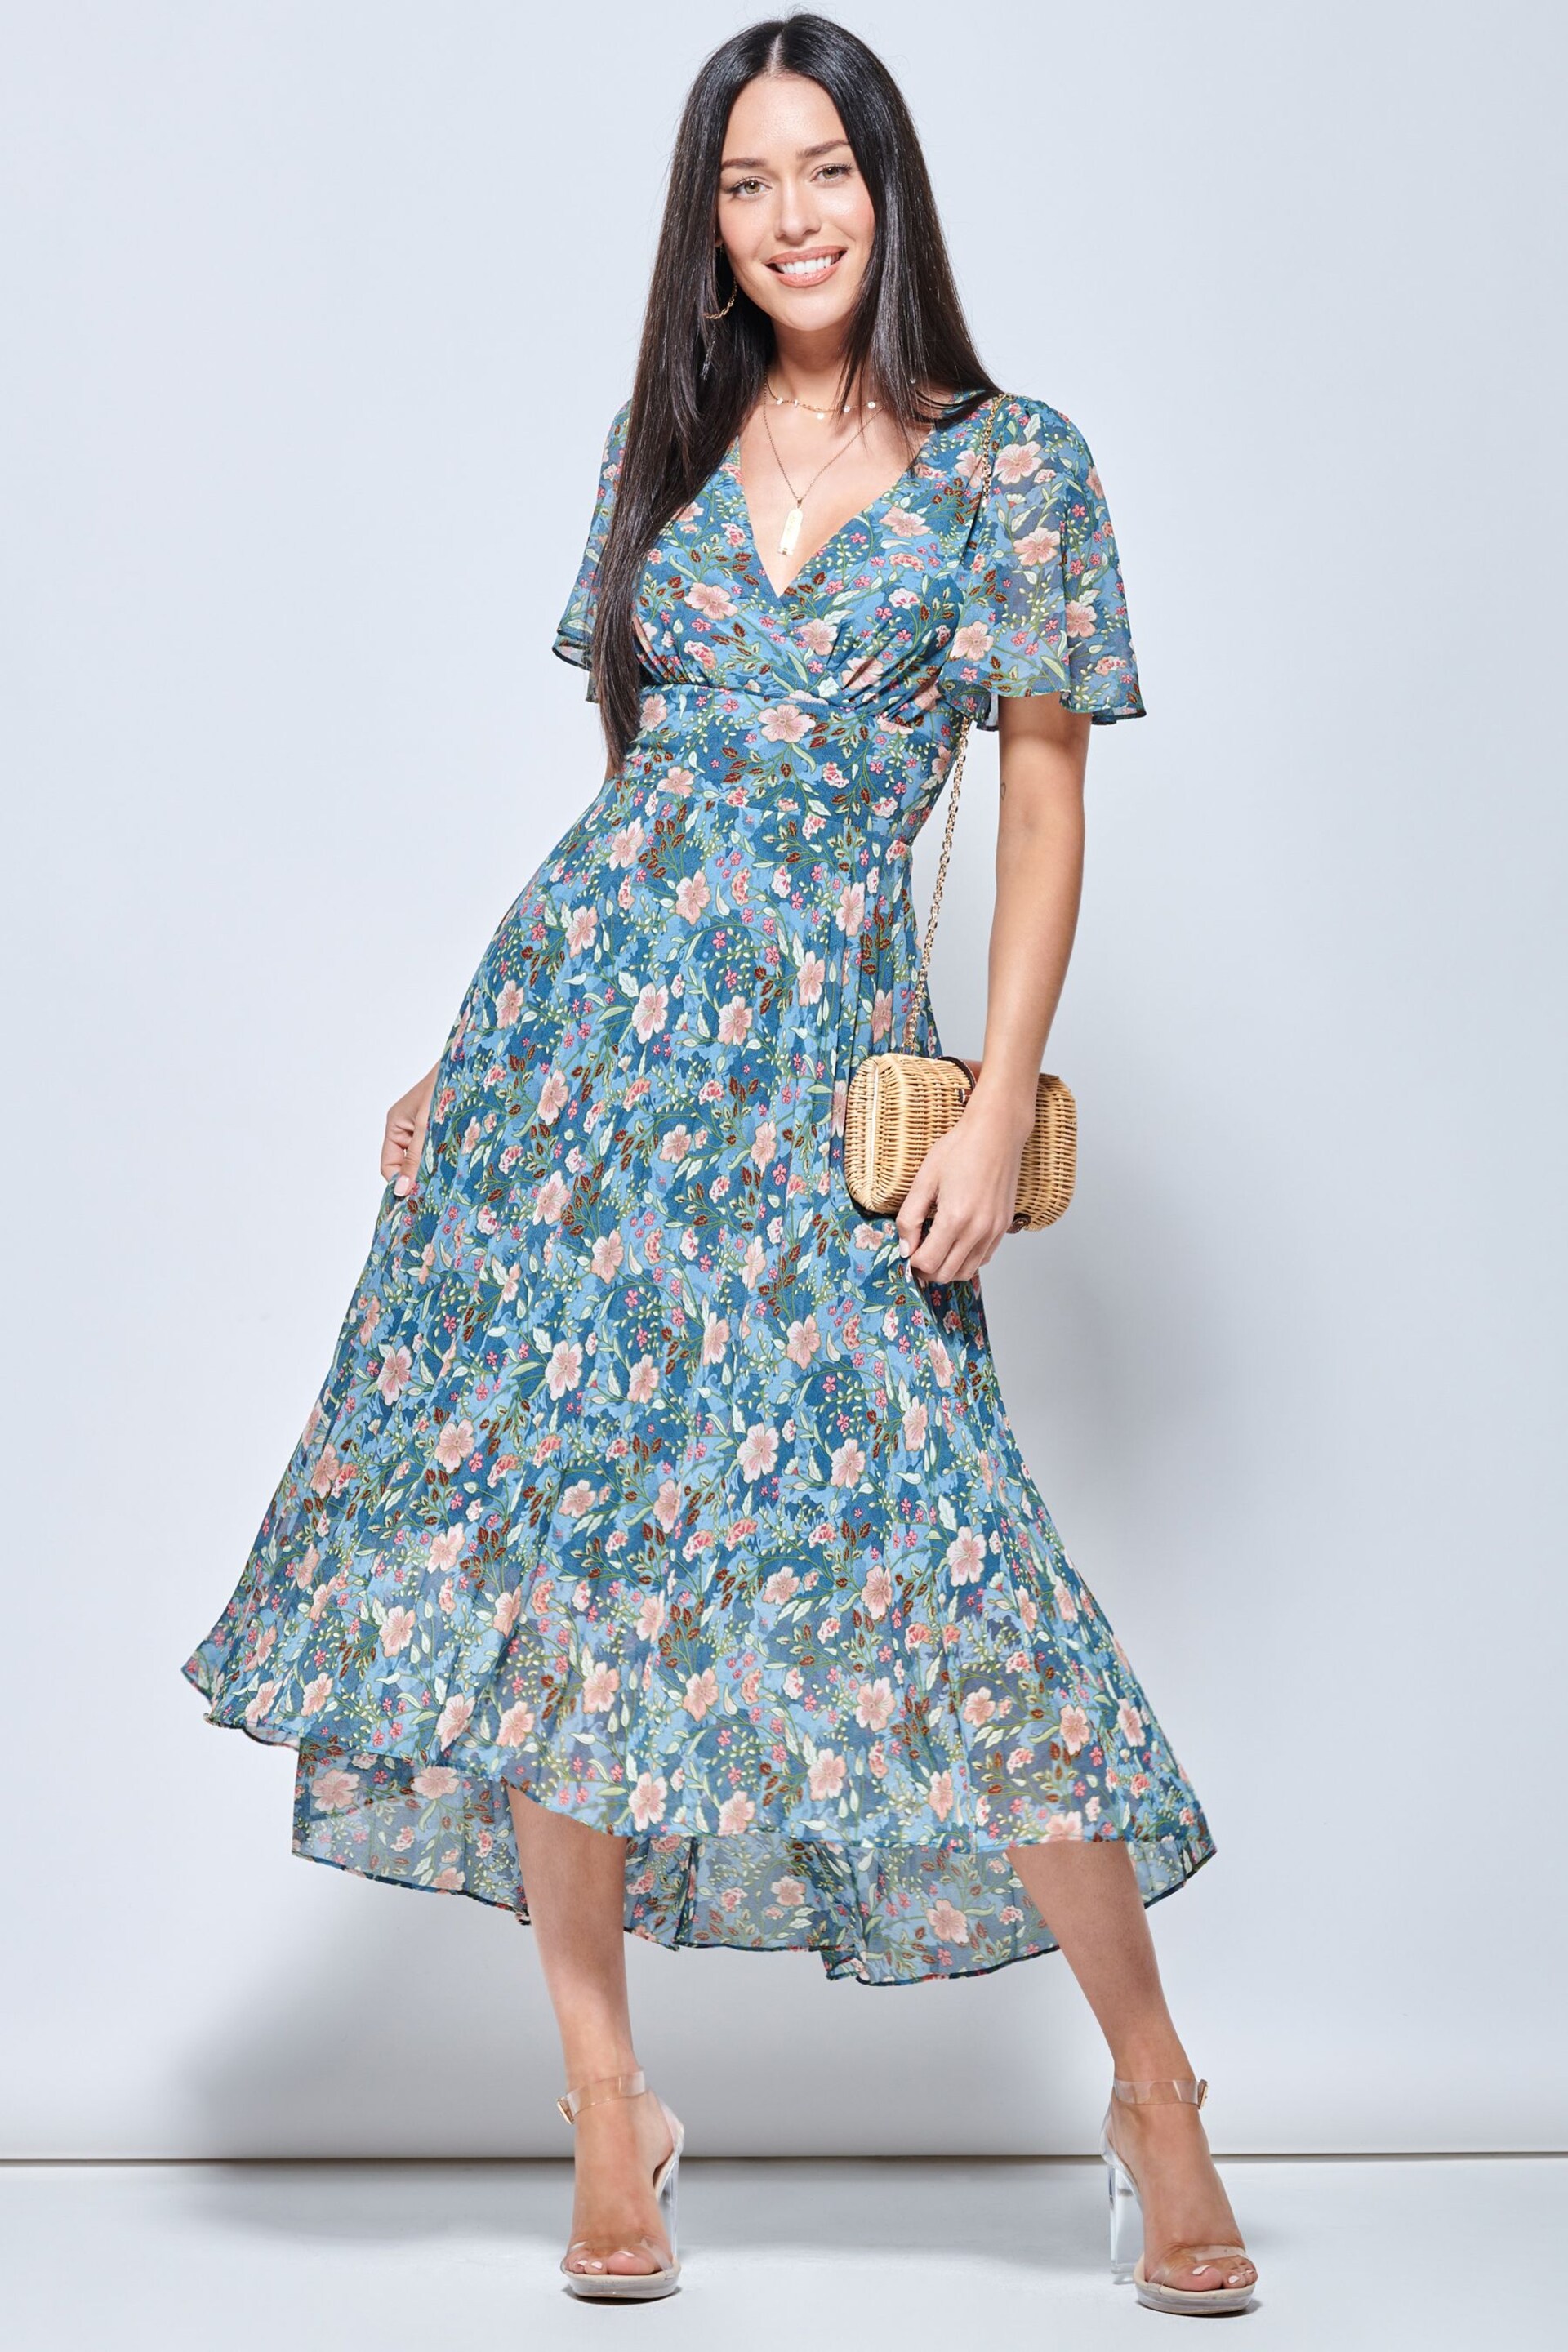 Jolie Moi Blue & Pink Floral Pleated Chiffon High Low Maxi Dress - Image 1 of 5